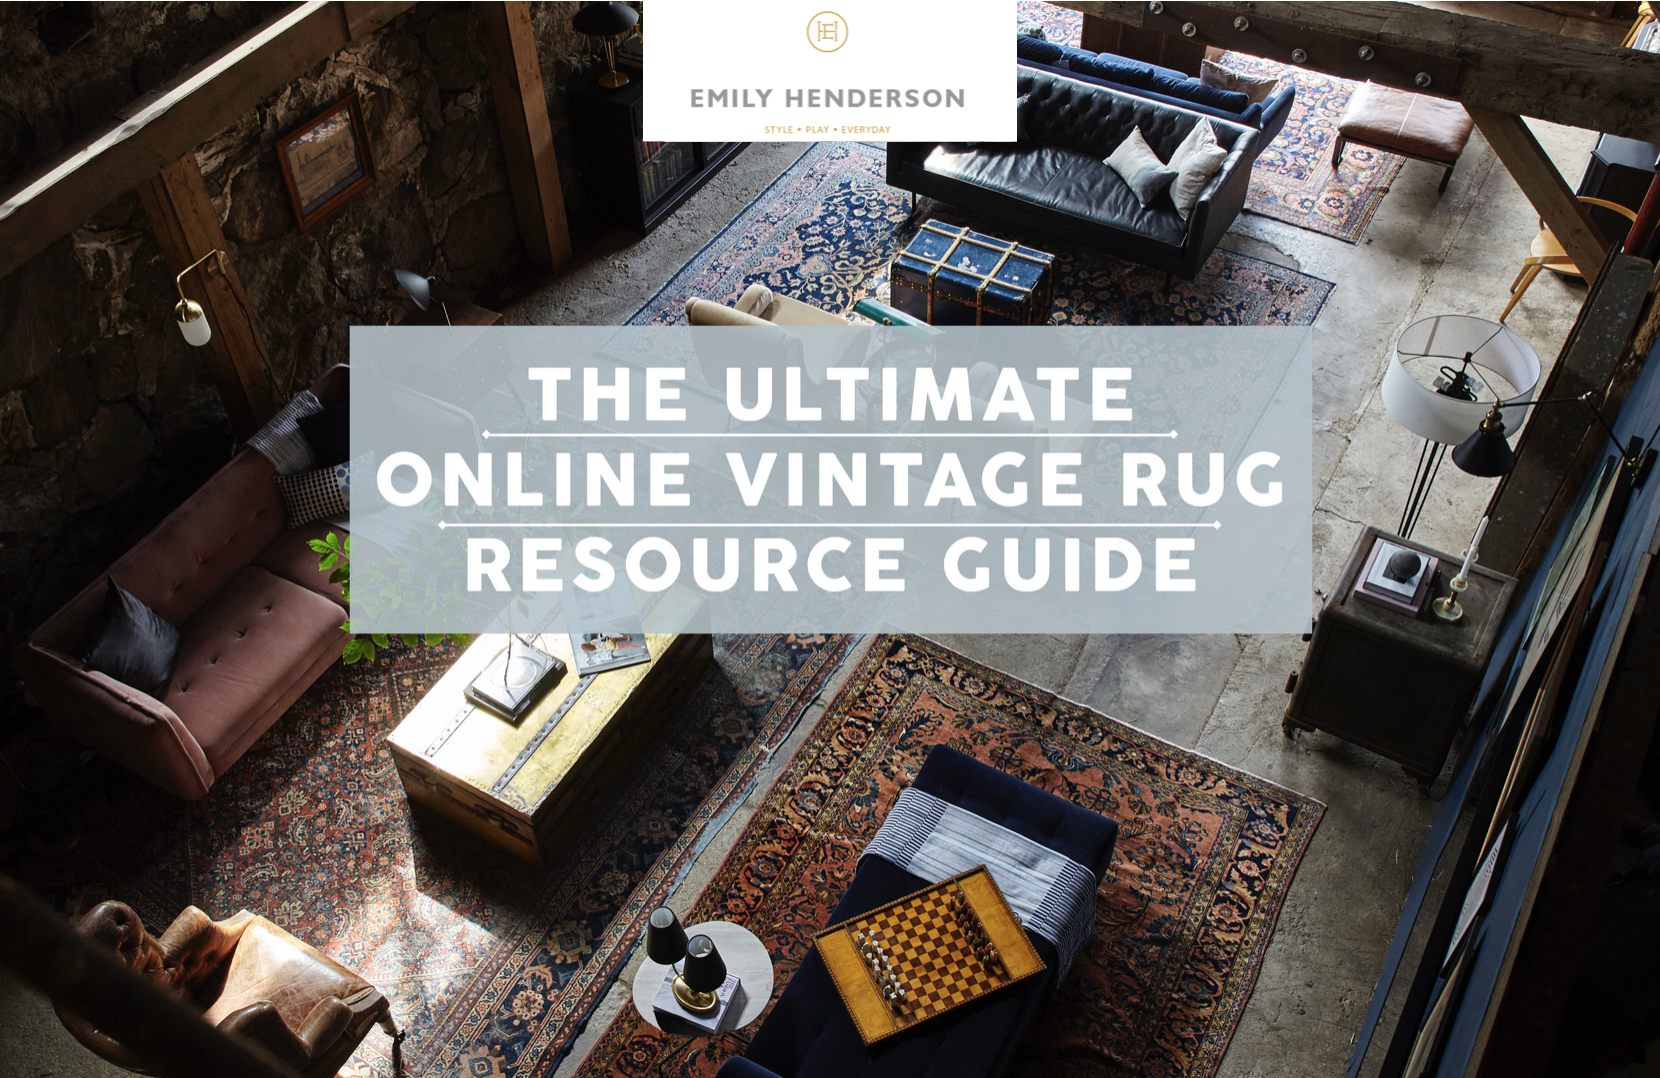 Bpr Wins A Top Spot In Emily Henderson S Vintage Rug Guide